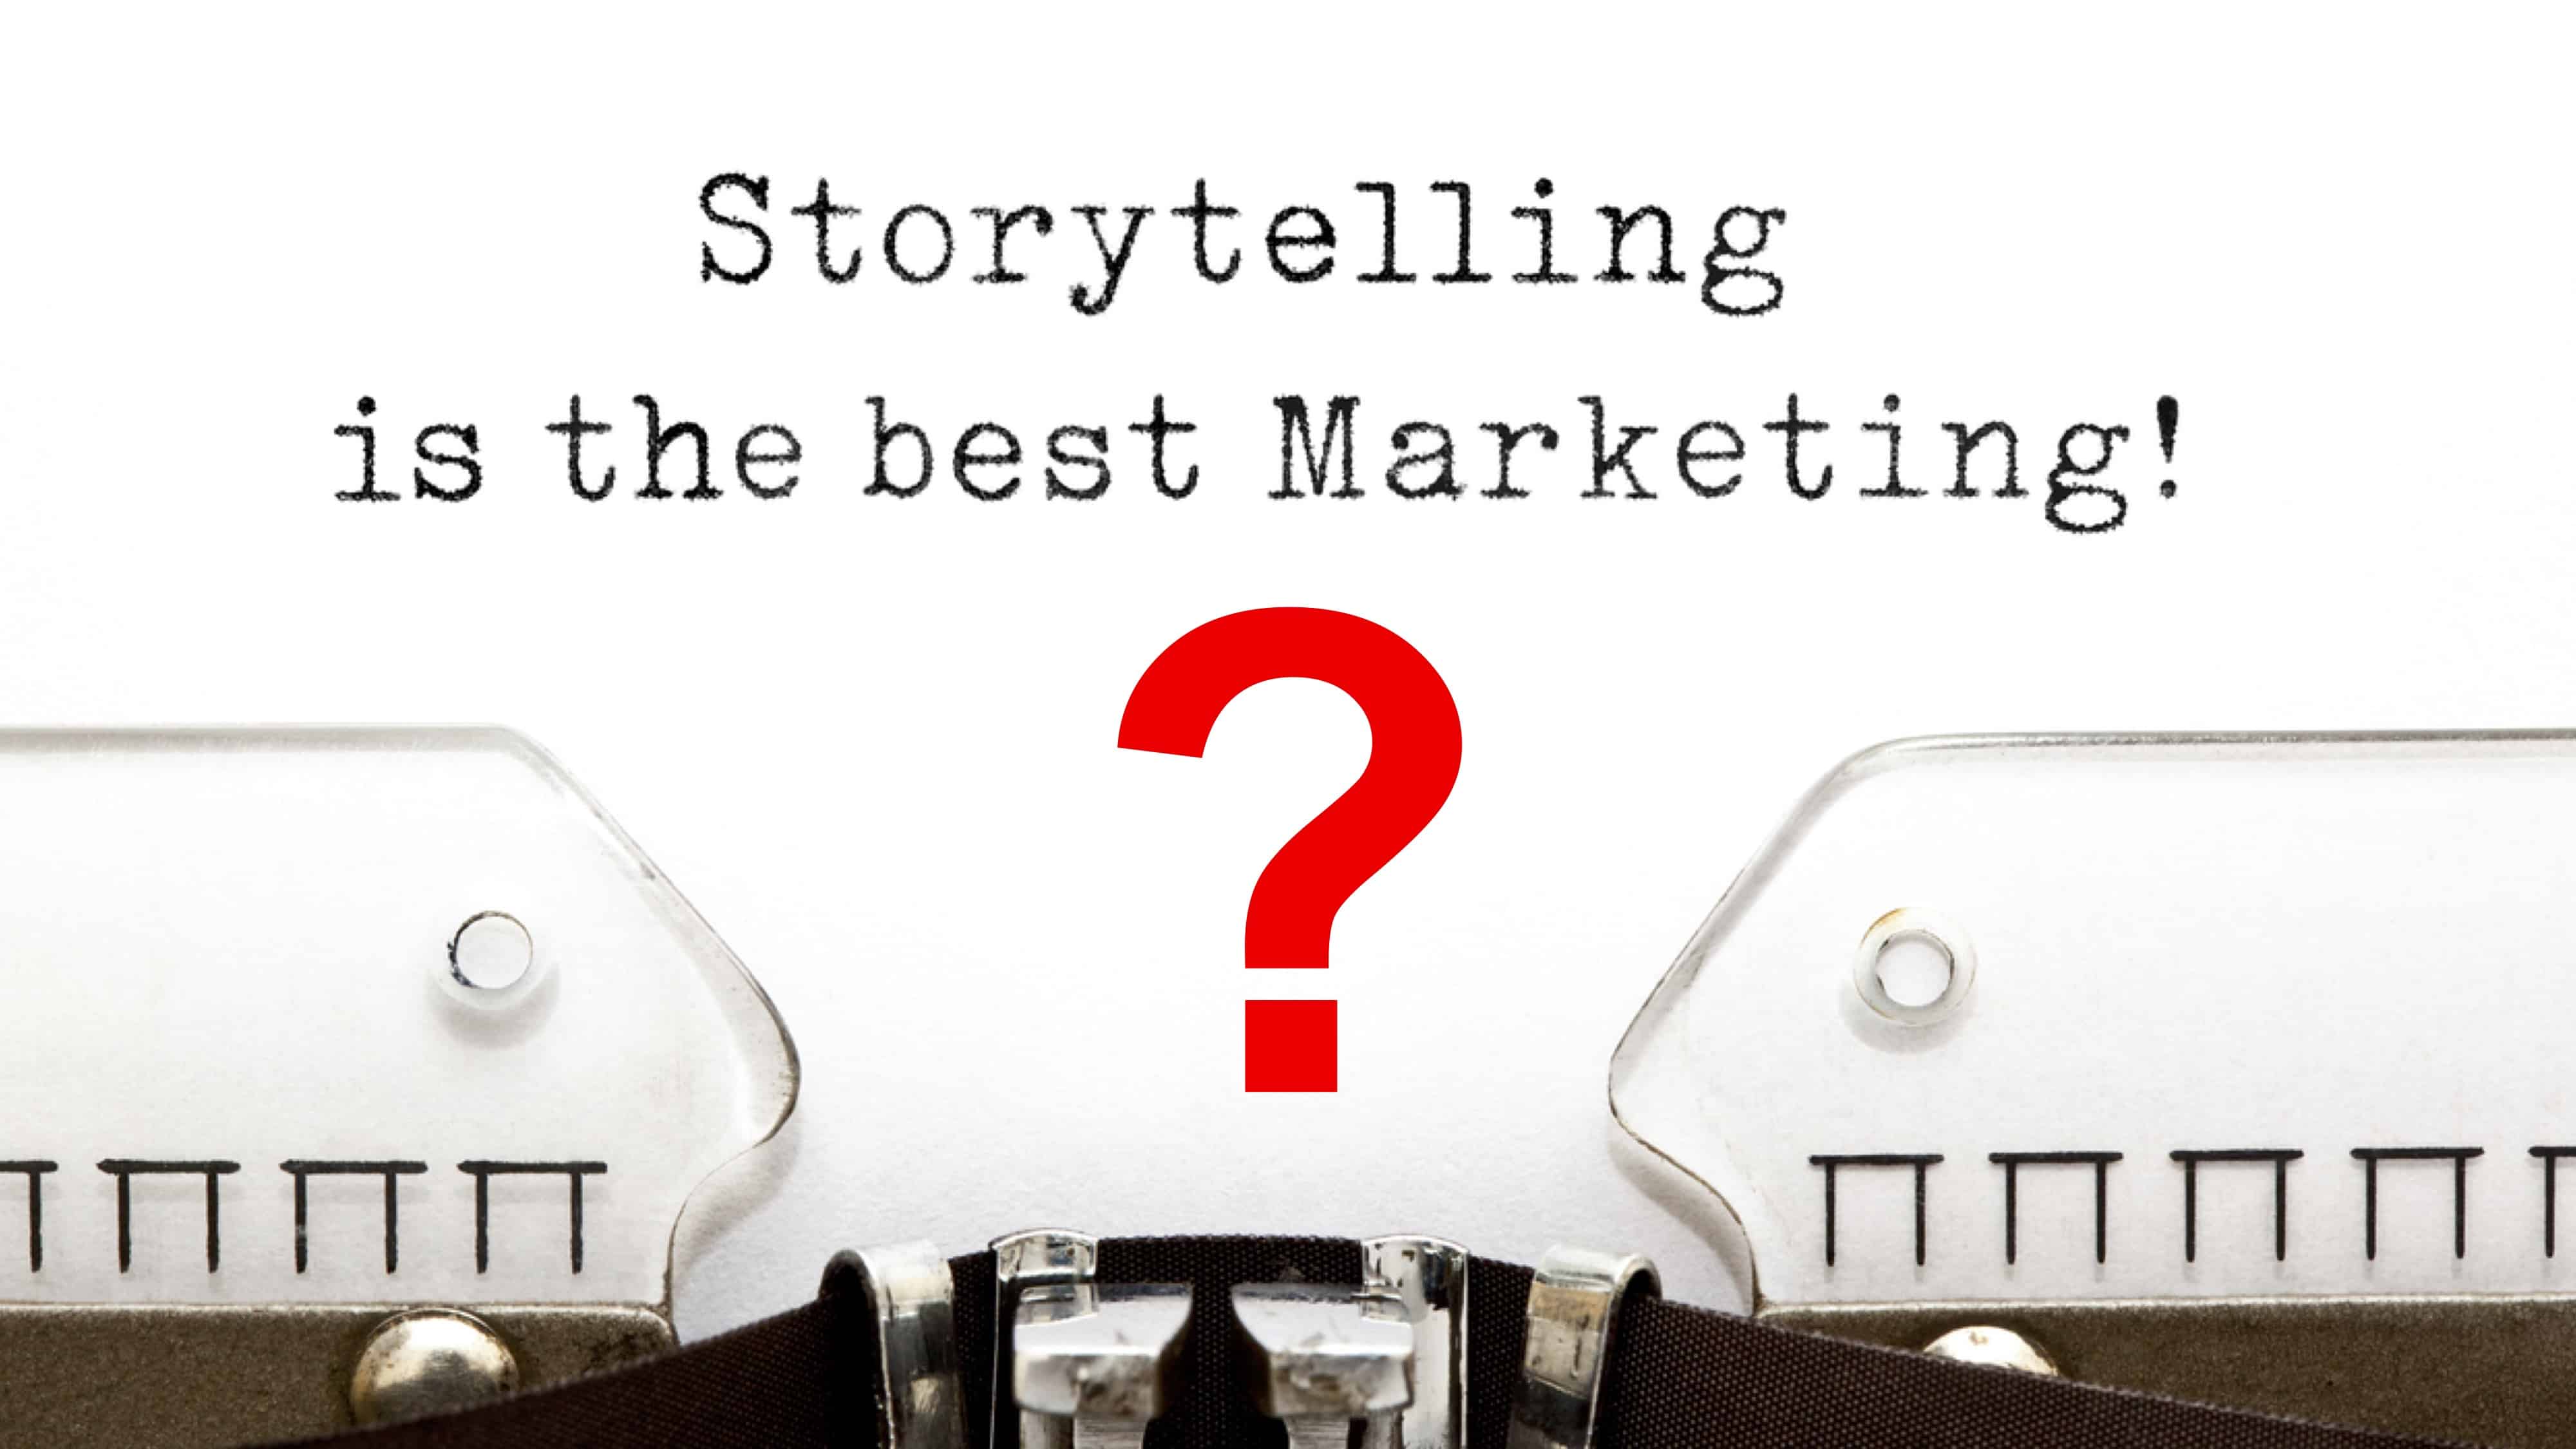 Storytelling is the best marketing